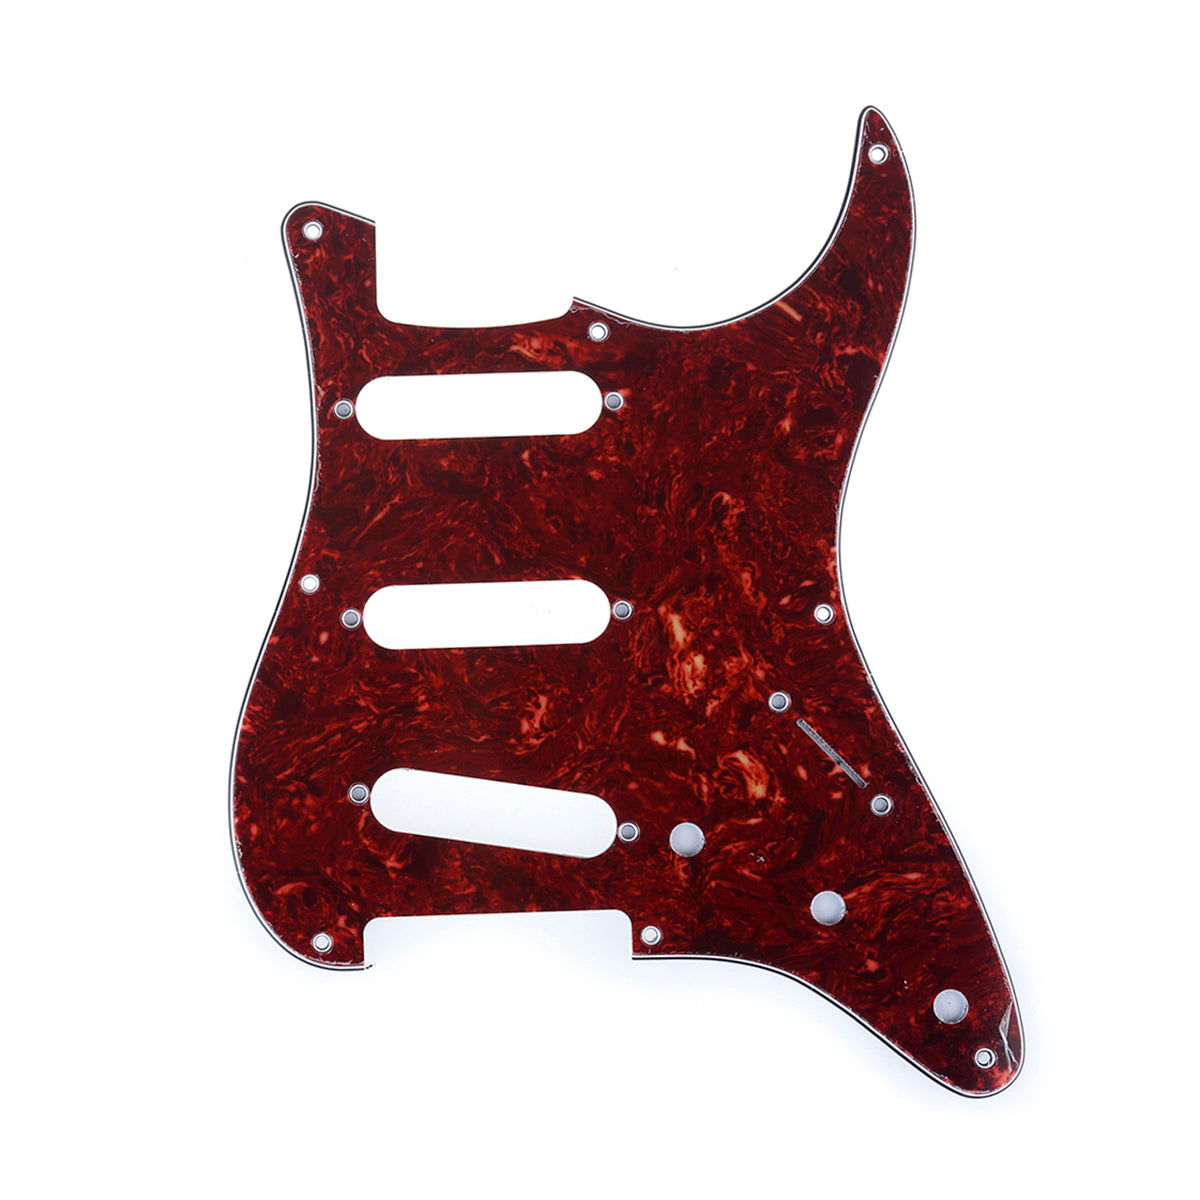 Musiclily Pro 8-Hole 50s 57 Vintage Style Strat SSS Guitar Pickguard for American Stratocaster, 4Ply Vintage Tortoise